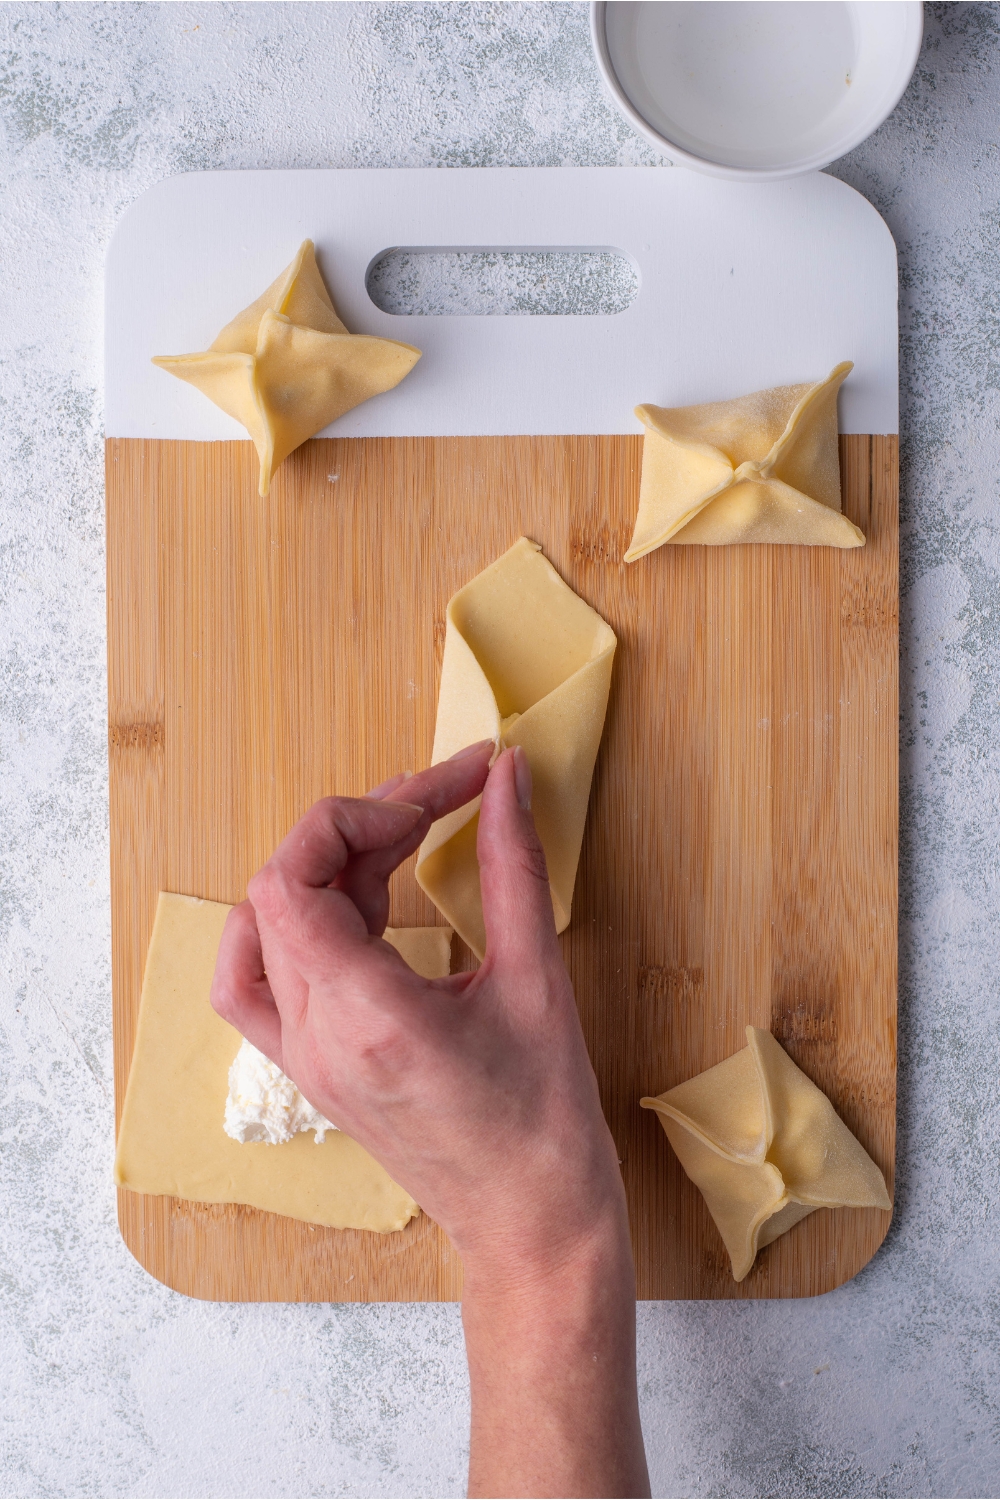 Hand pinching two corners of a wonton wrapper that is on a cutting board alongside cream cheese filled rangoon.